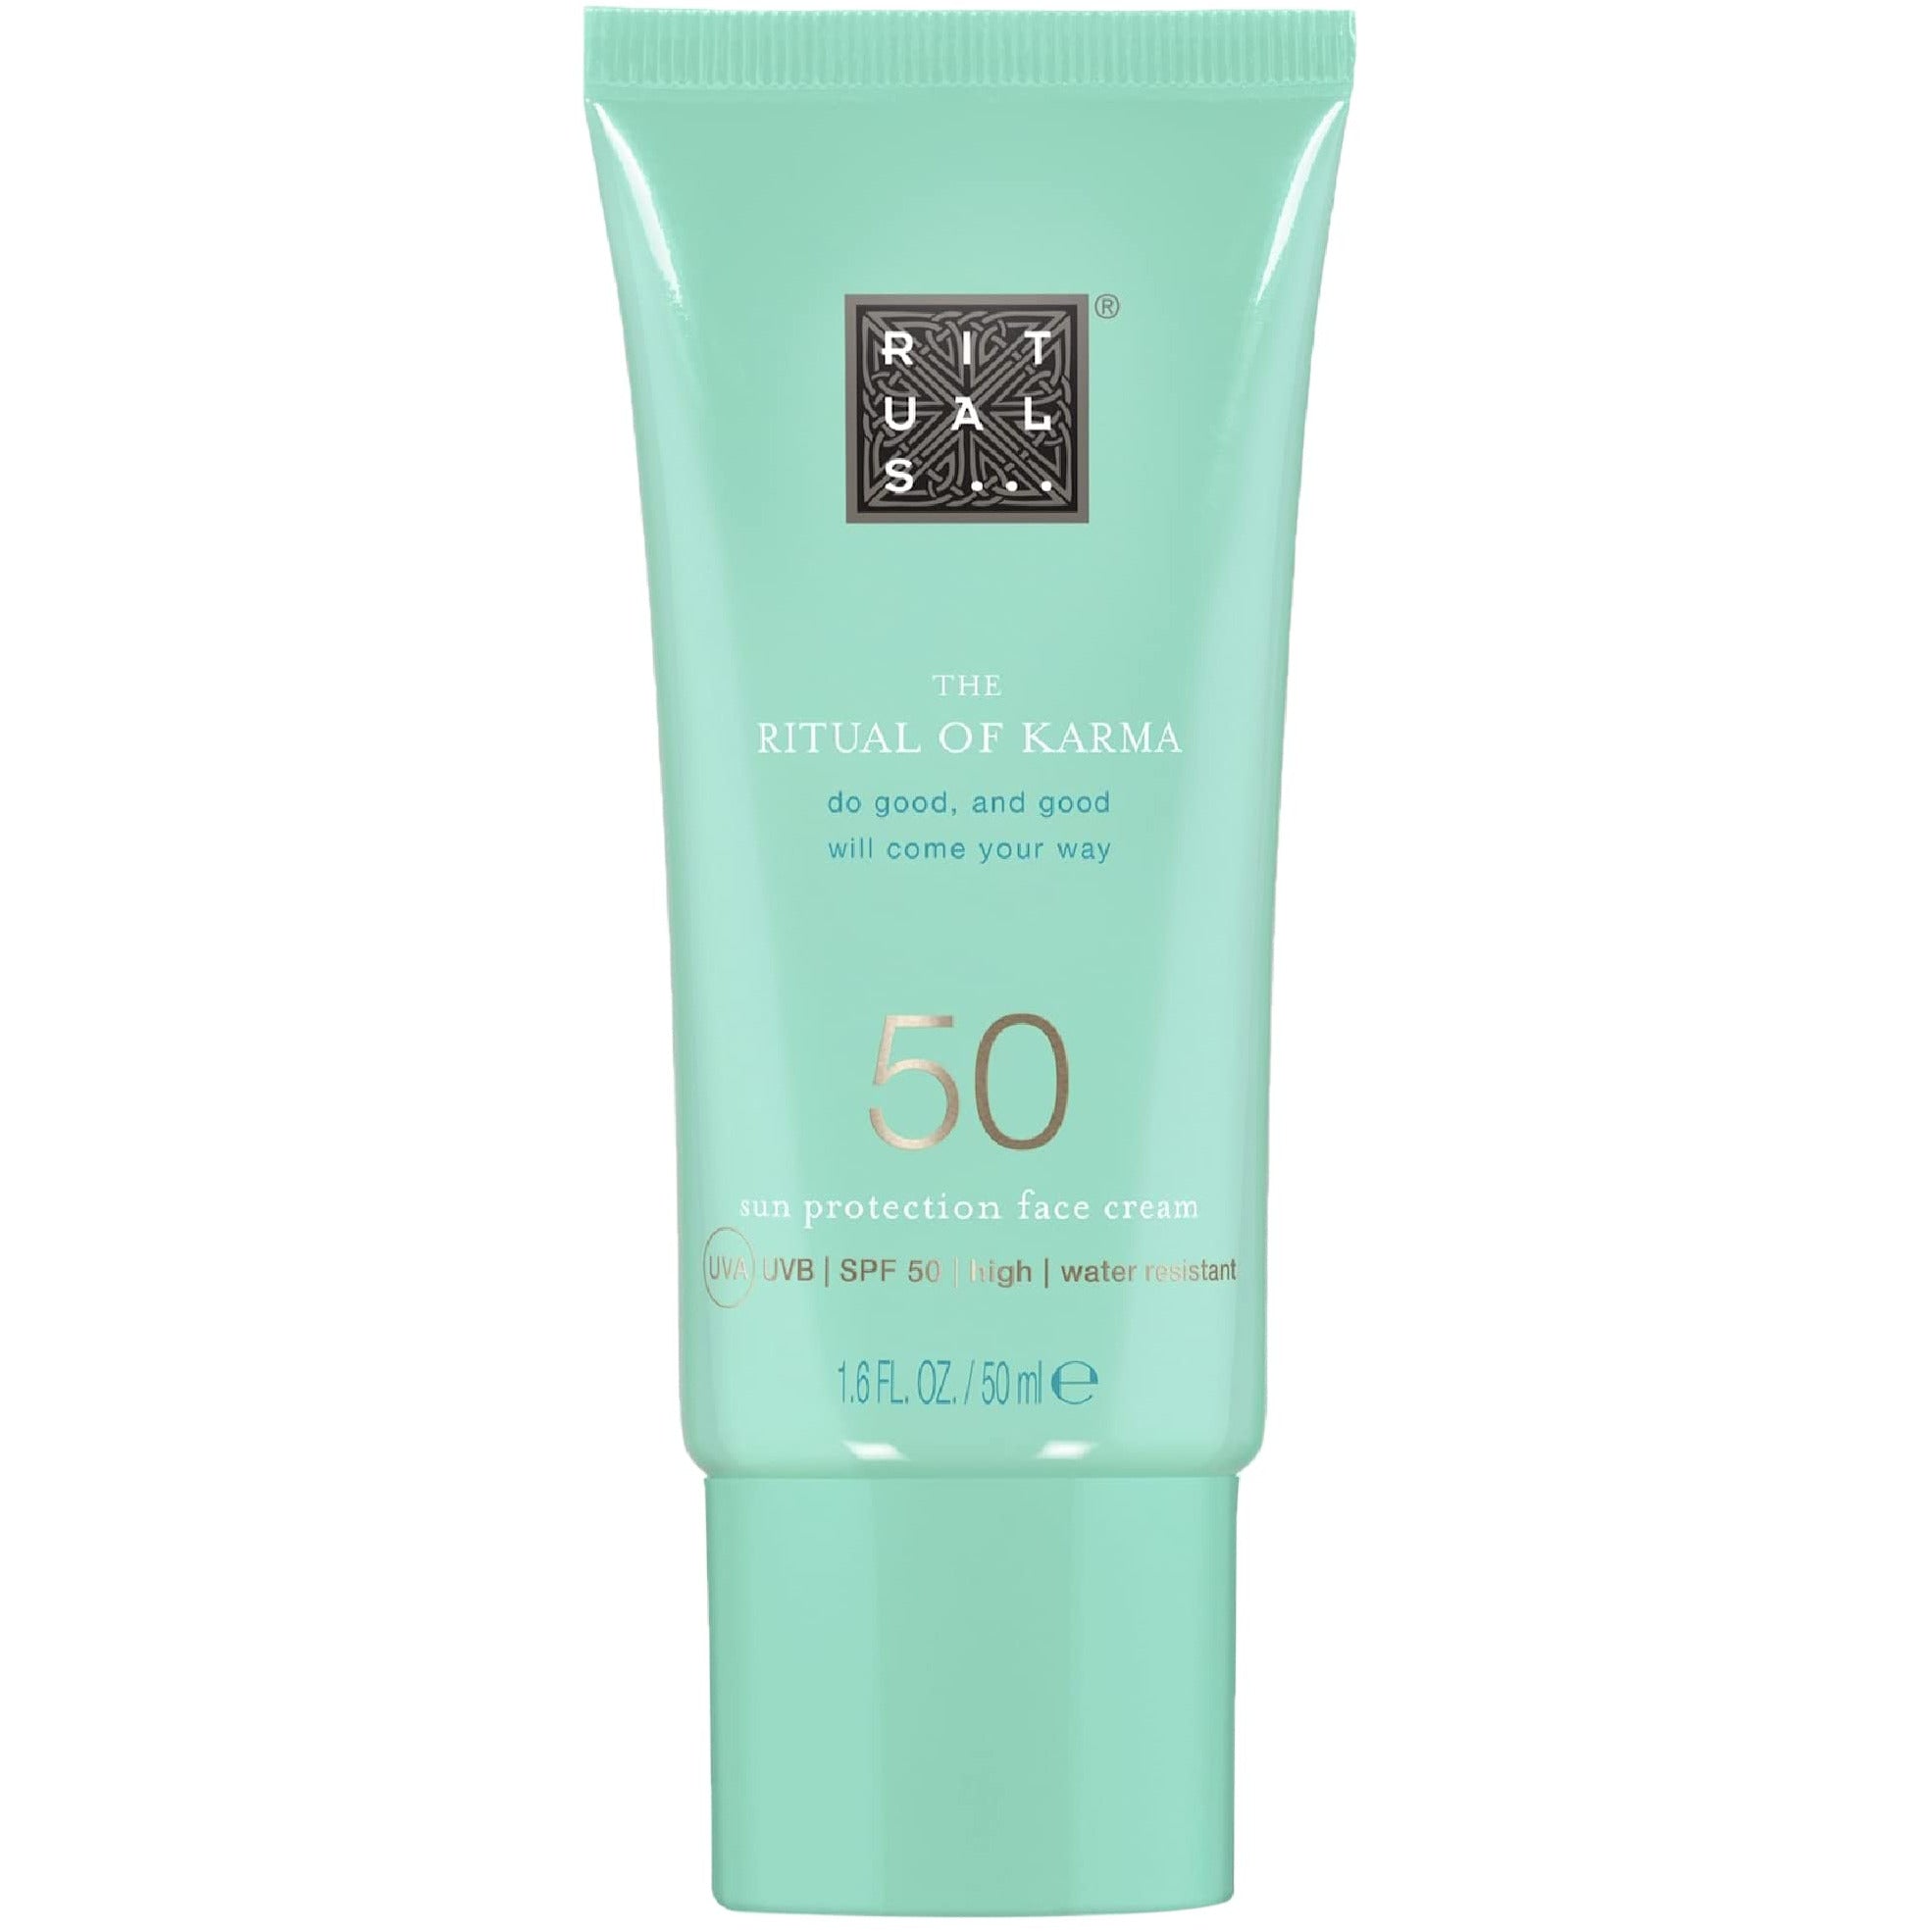 RITUALS Sun Protection Face SPF 50 from The Ritual of 50 – BABACLICK